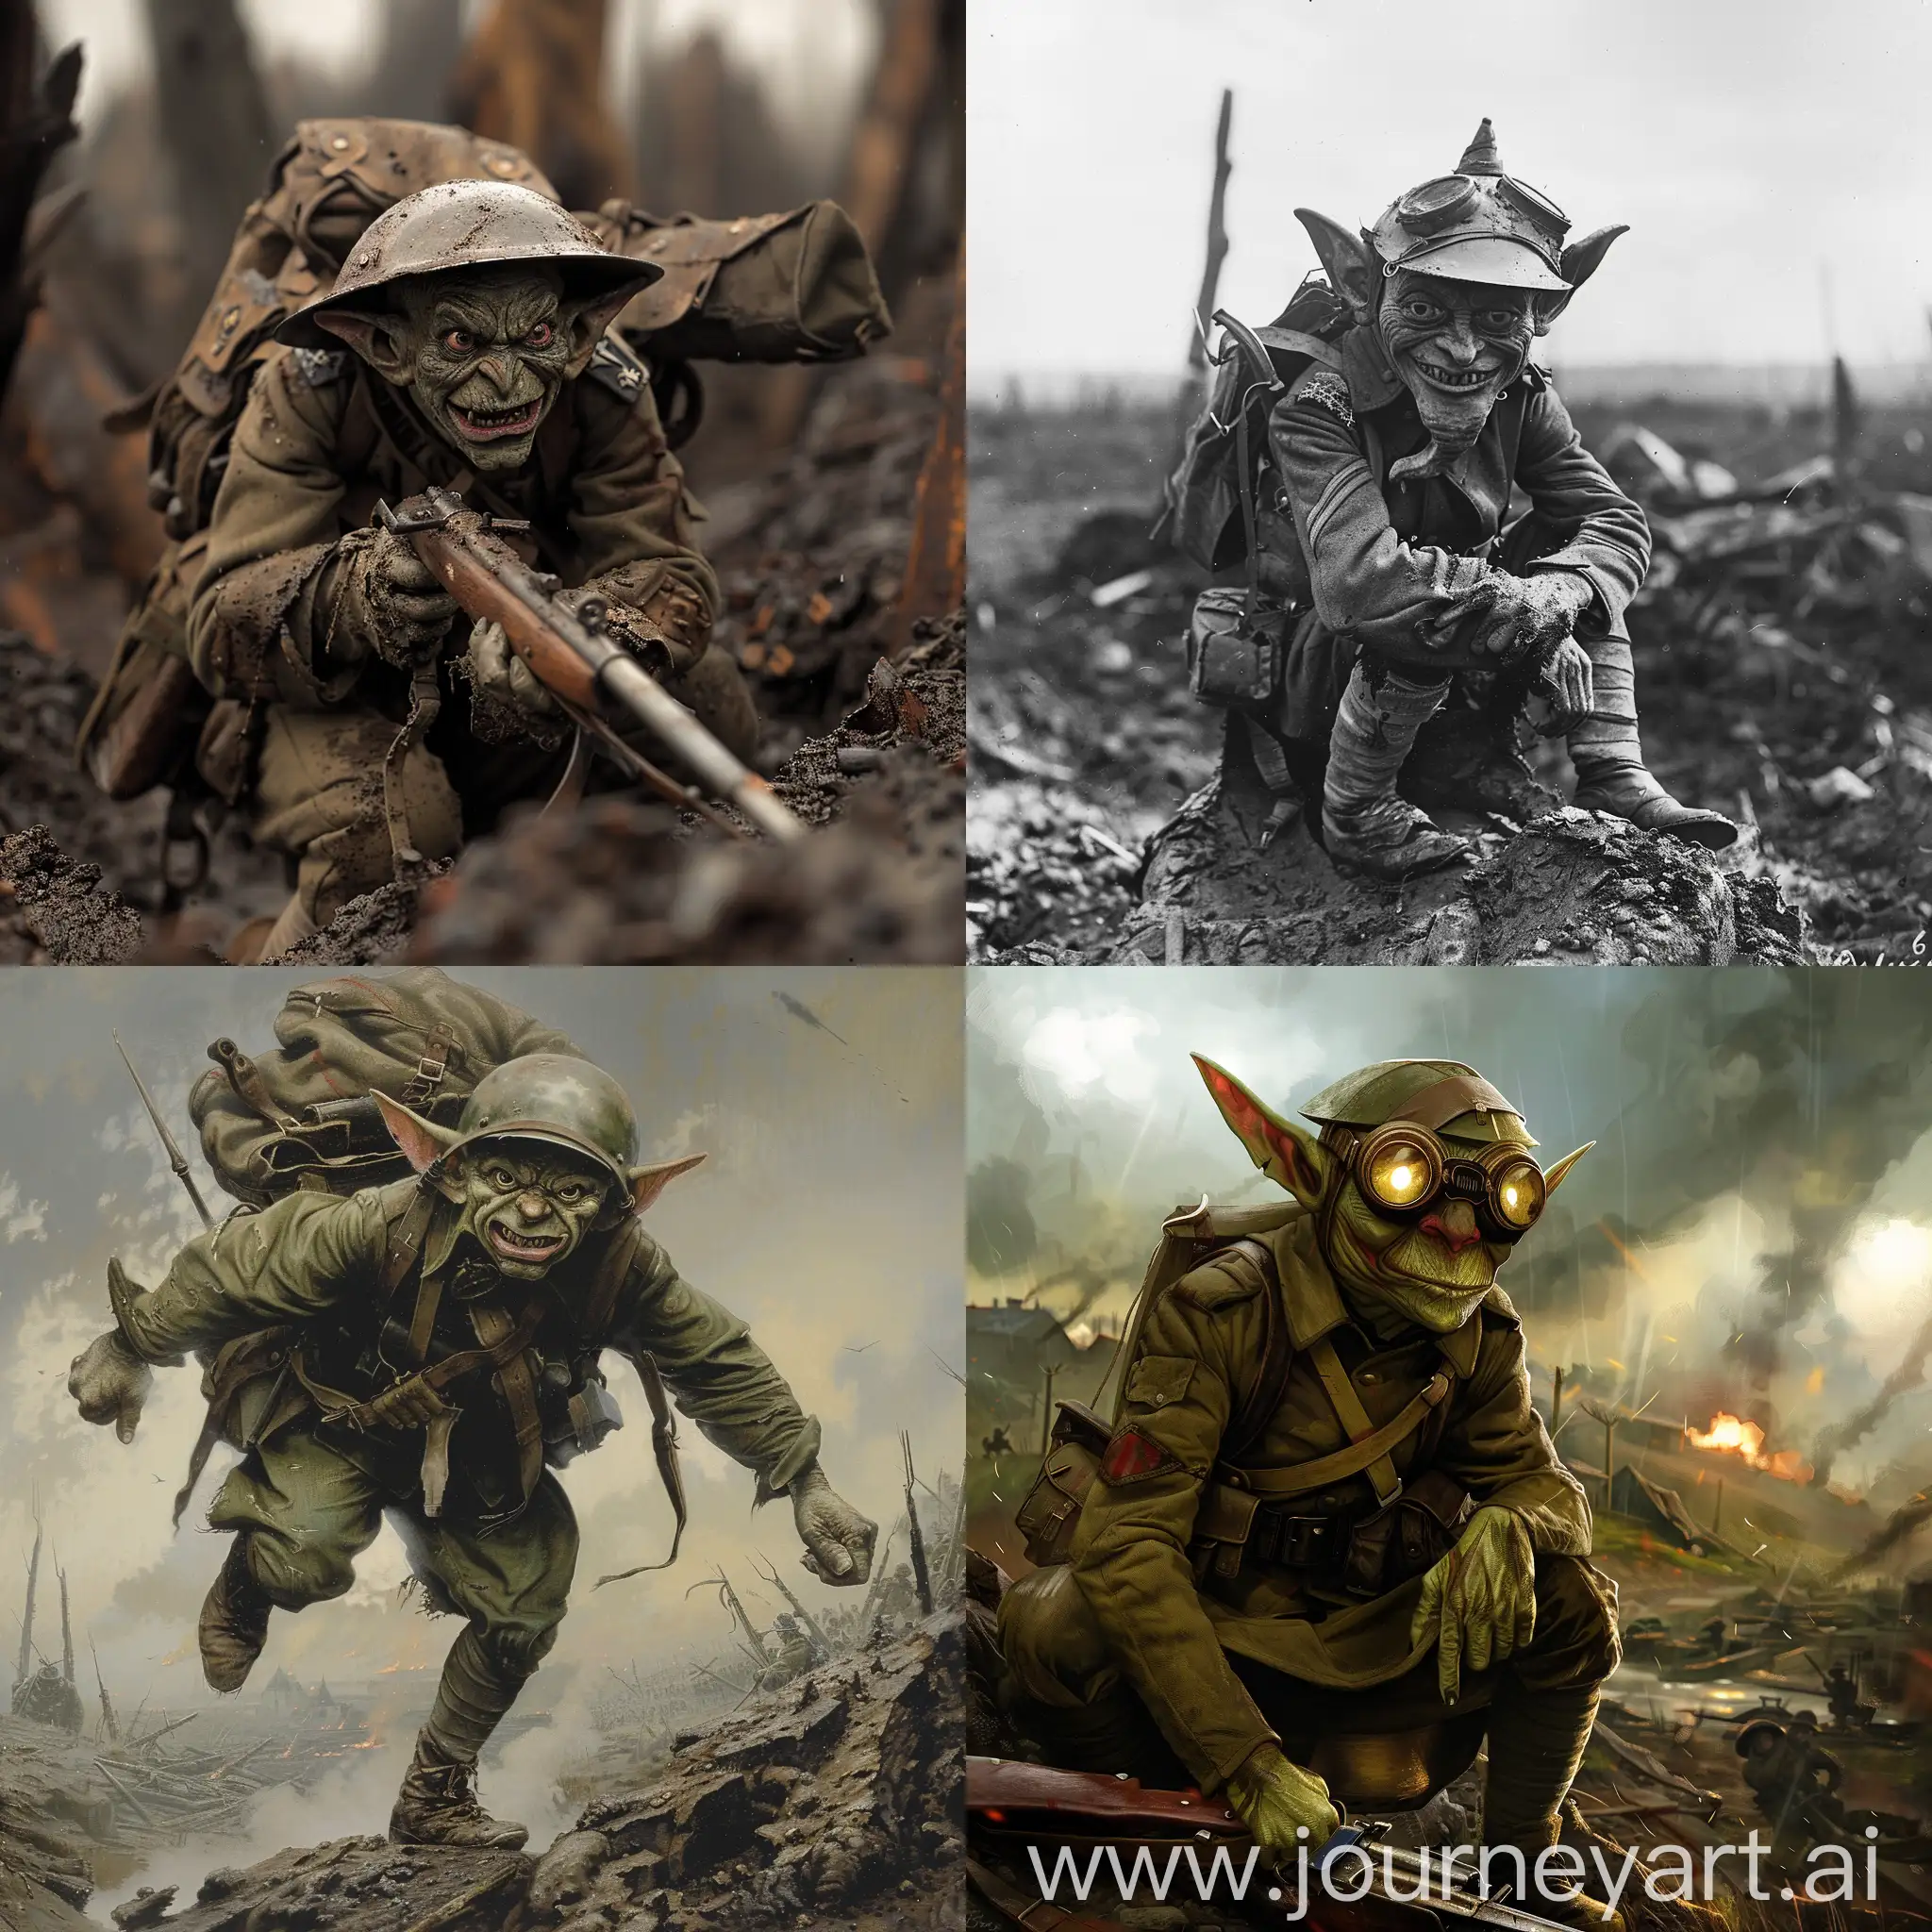 Goblin-in-World-War-1-Art-A-Mythical-Creature-Amidst-Historical-Conflict